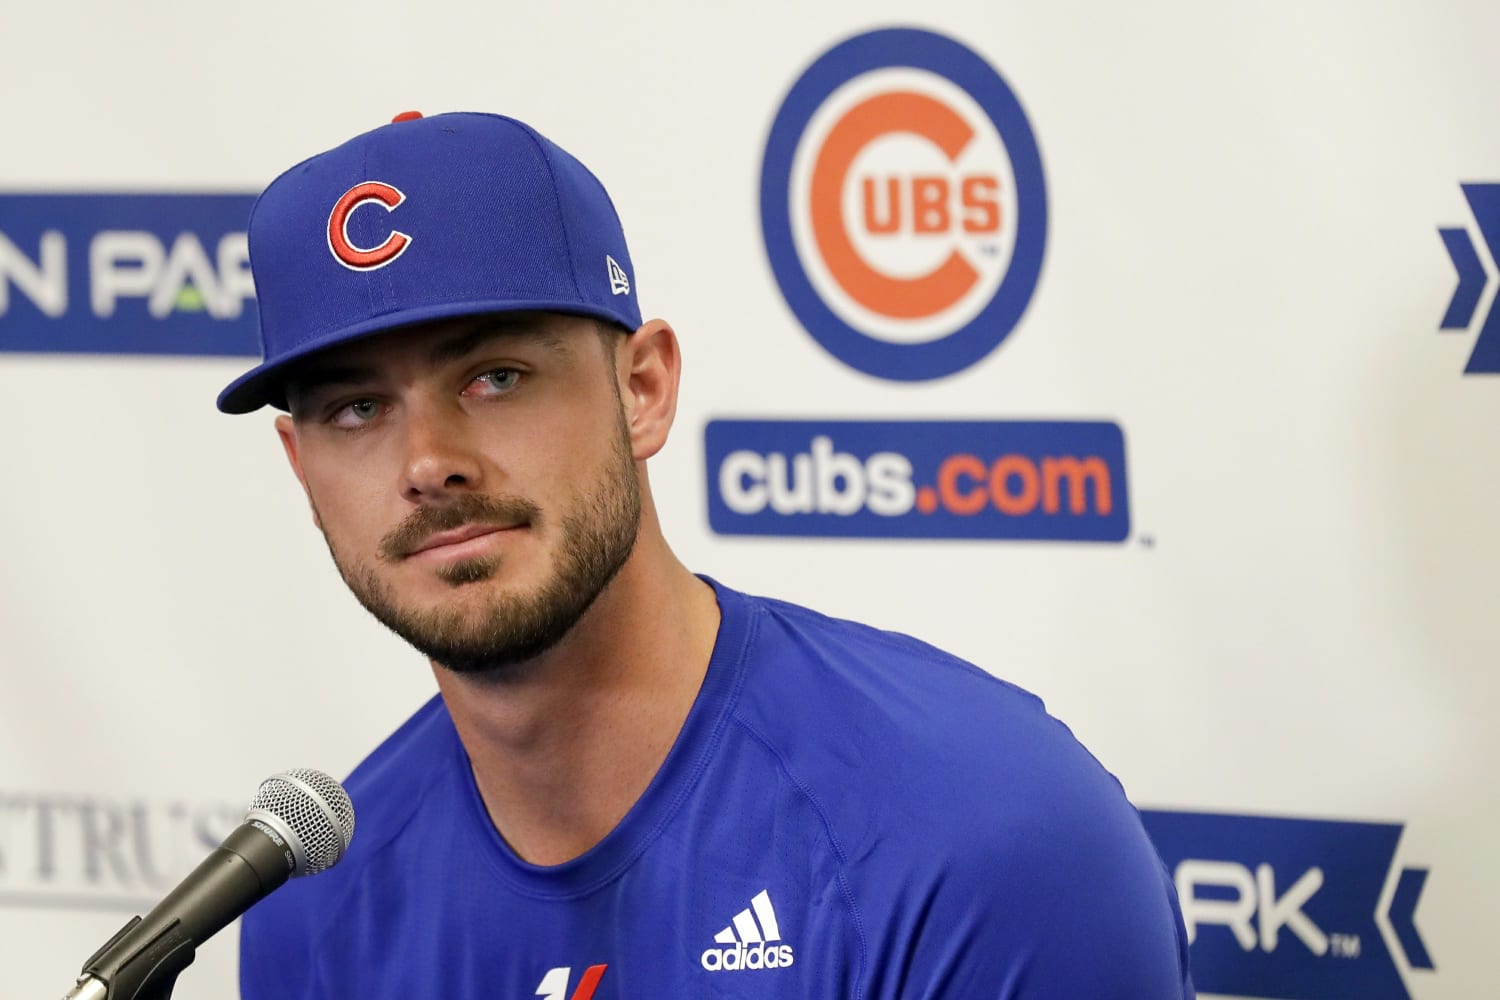 Cubs 3B Bryant: No hard feelings on losing grievance